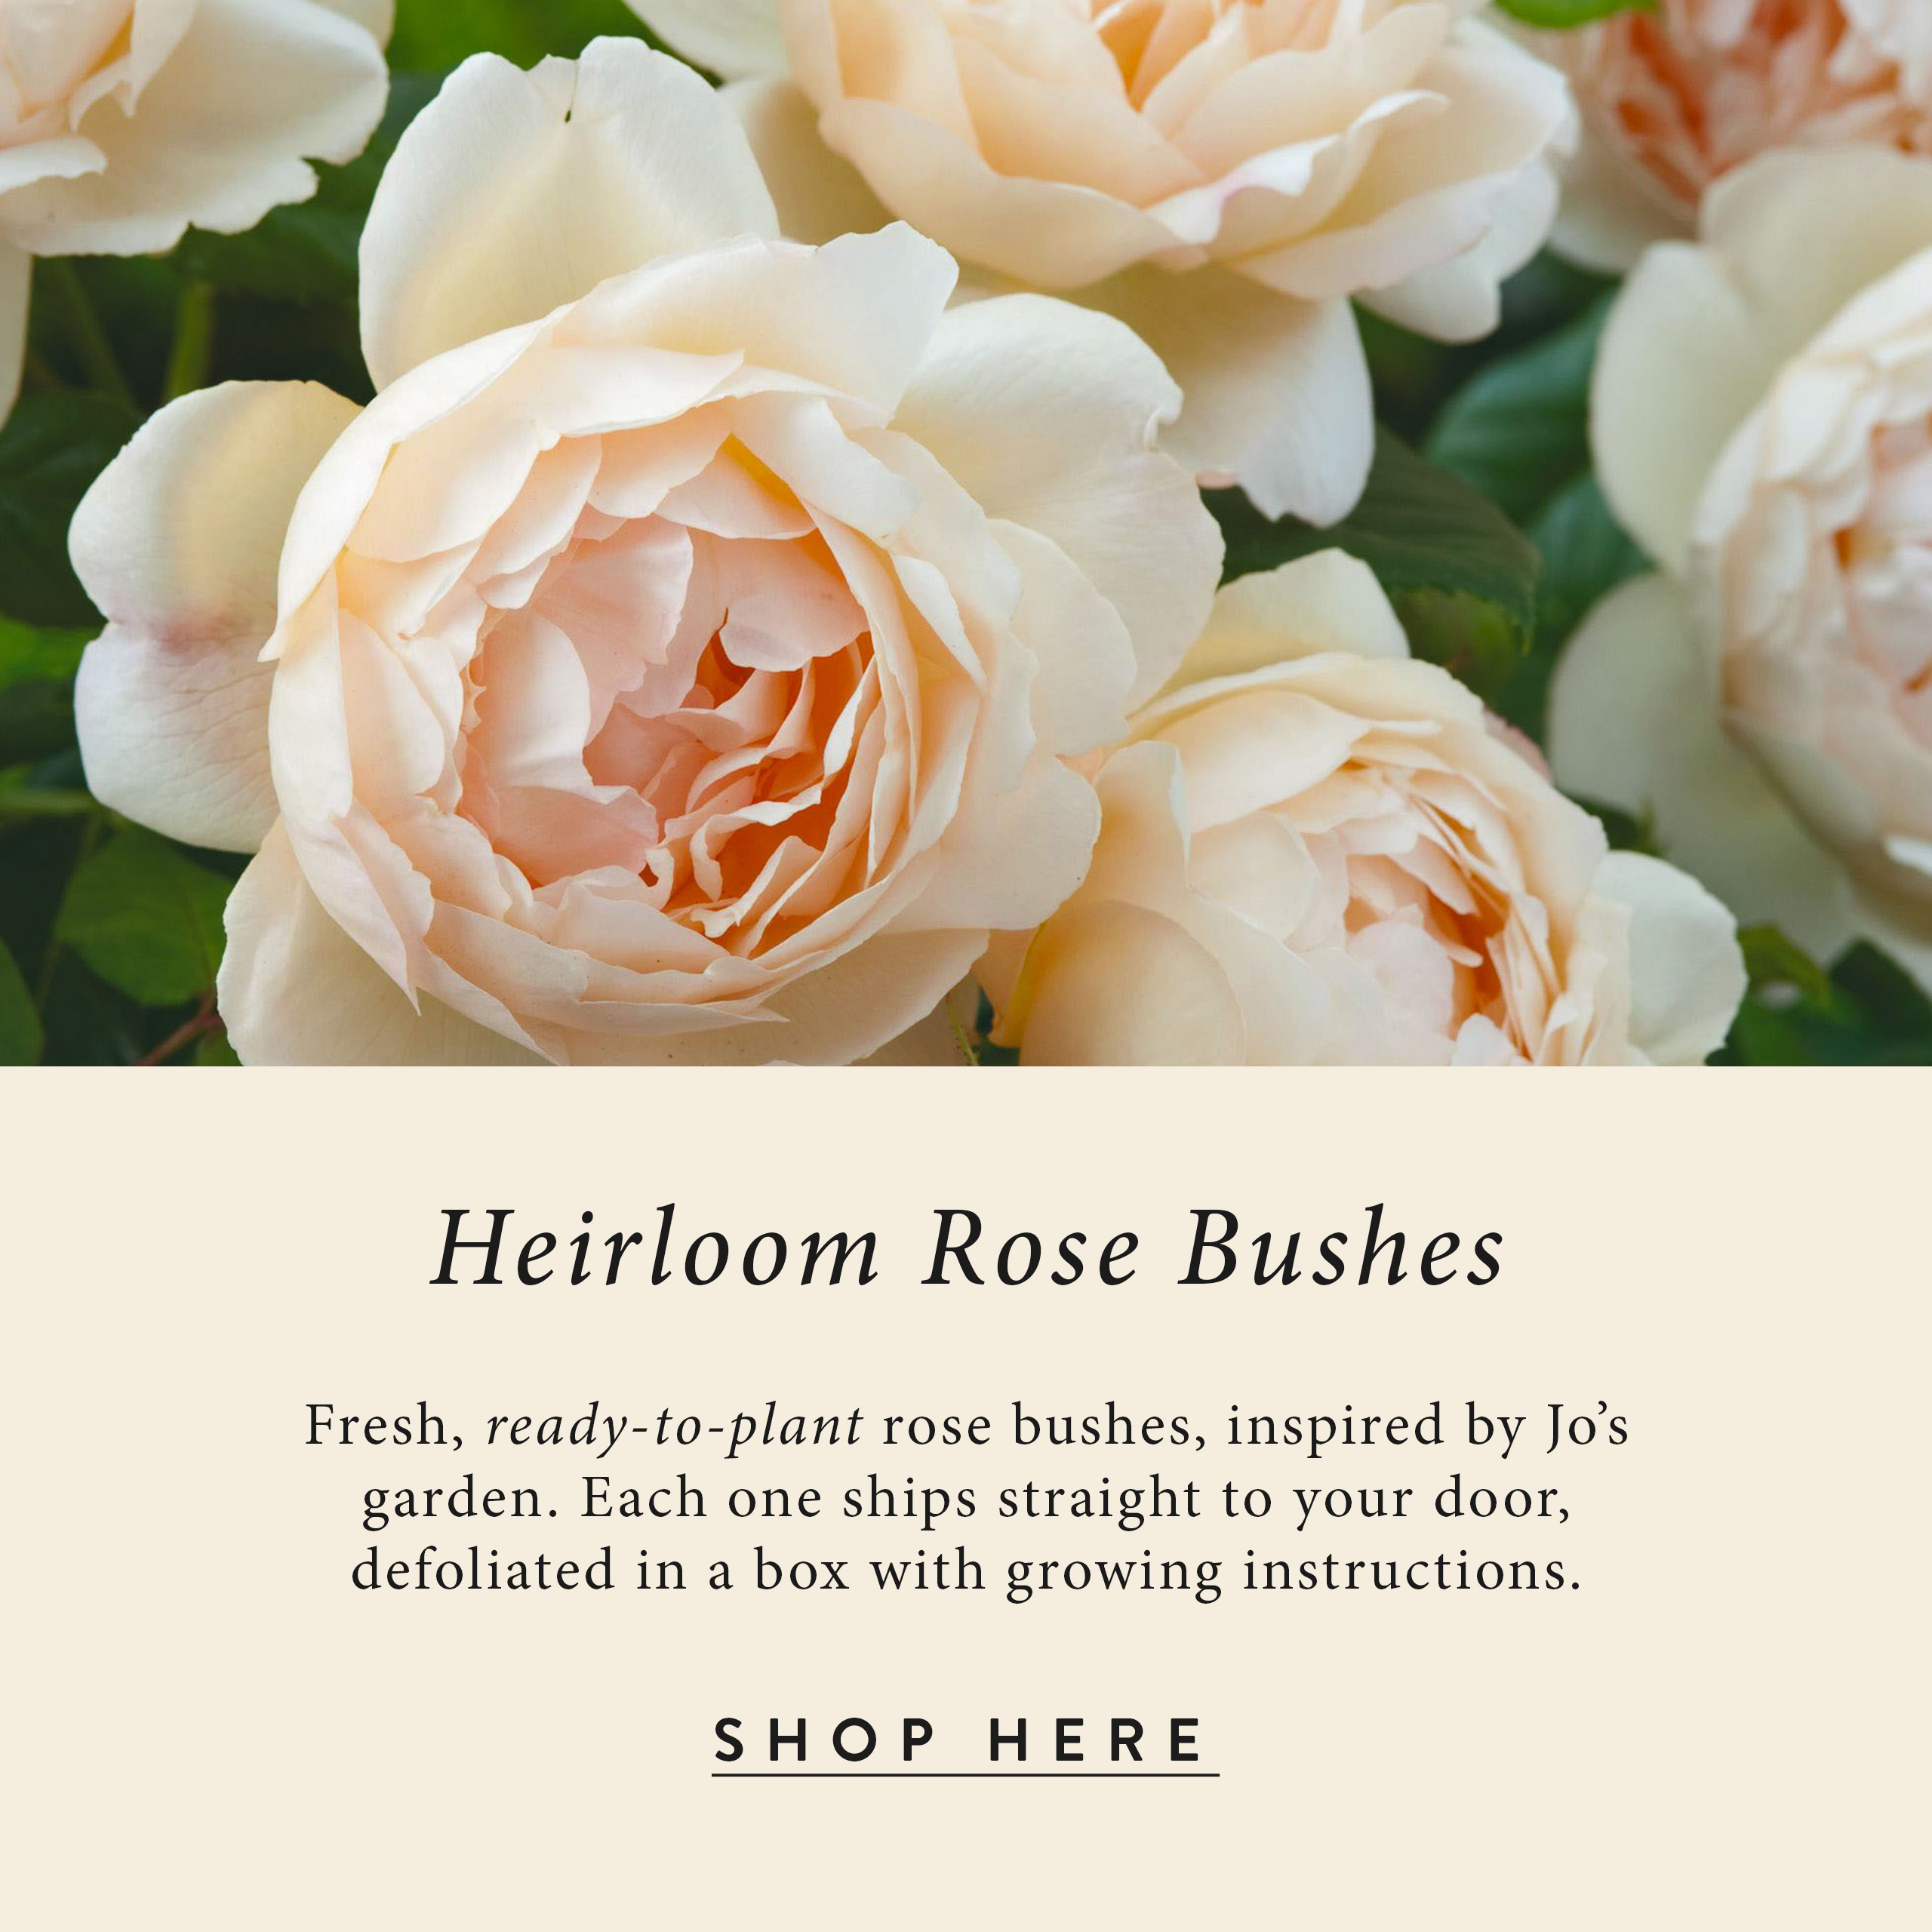 Heirloom Rose Bushes - Inspired by the flowers in Jo's garden, take your pick of fresh, ready-to-plant rose bushes. Each one ships straight to your door-defoliated in a box with growing instructions. Click to shop here